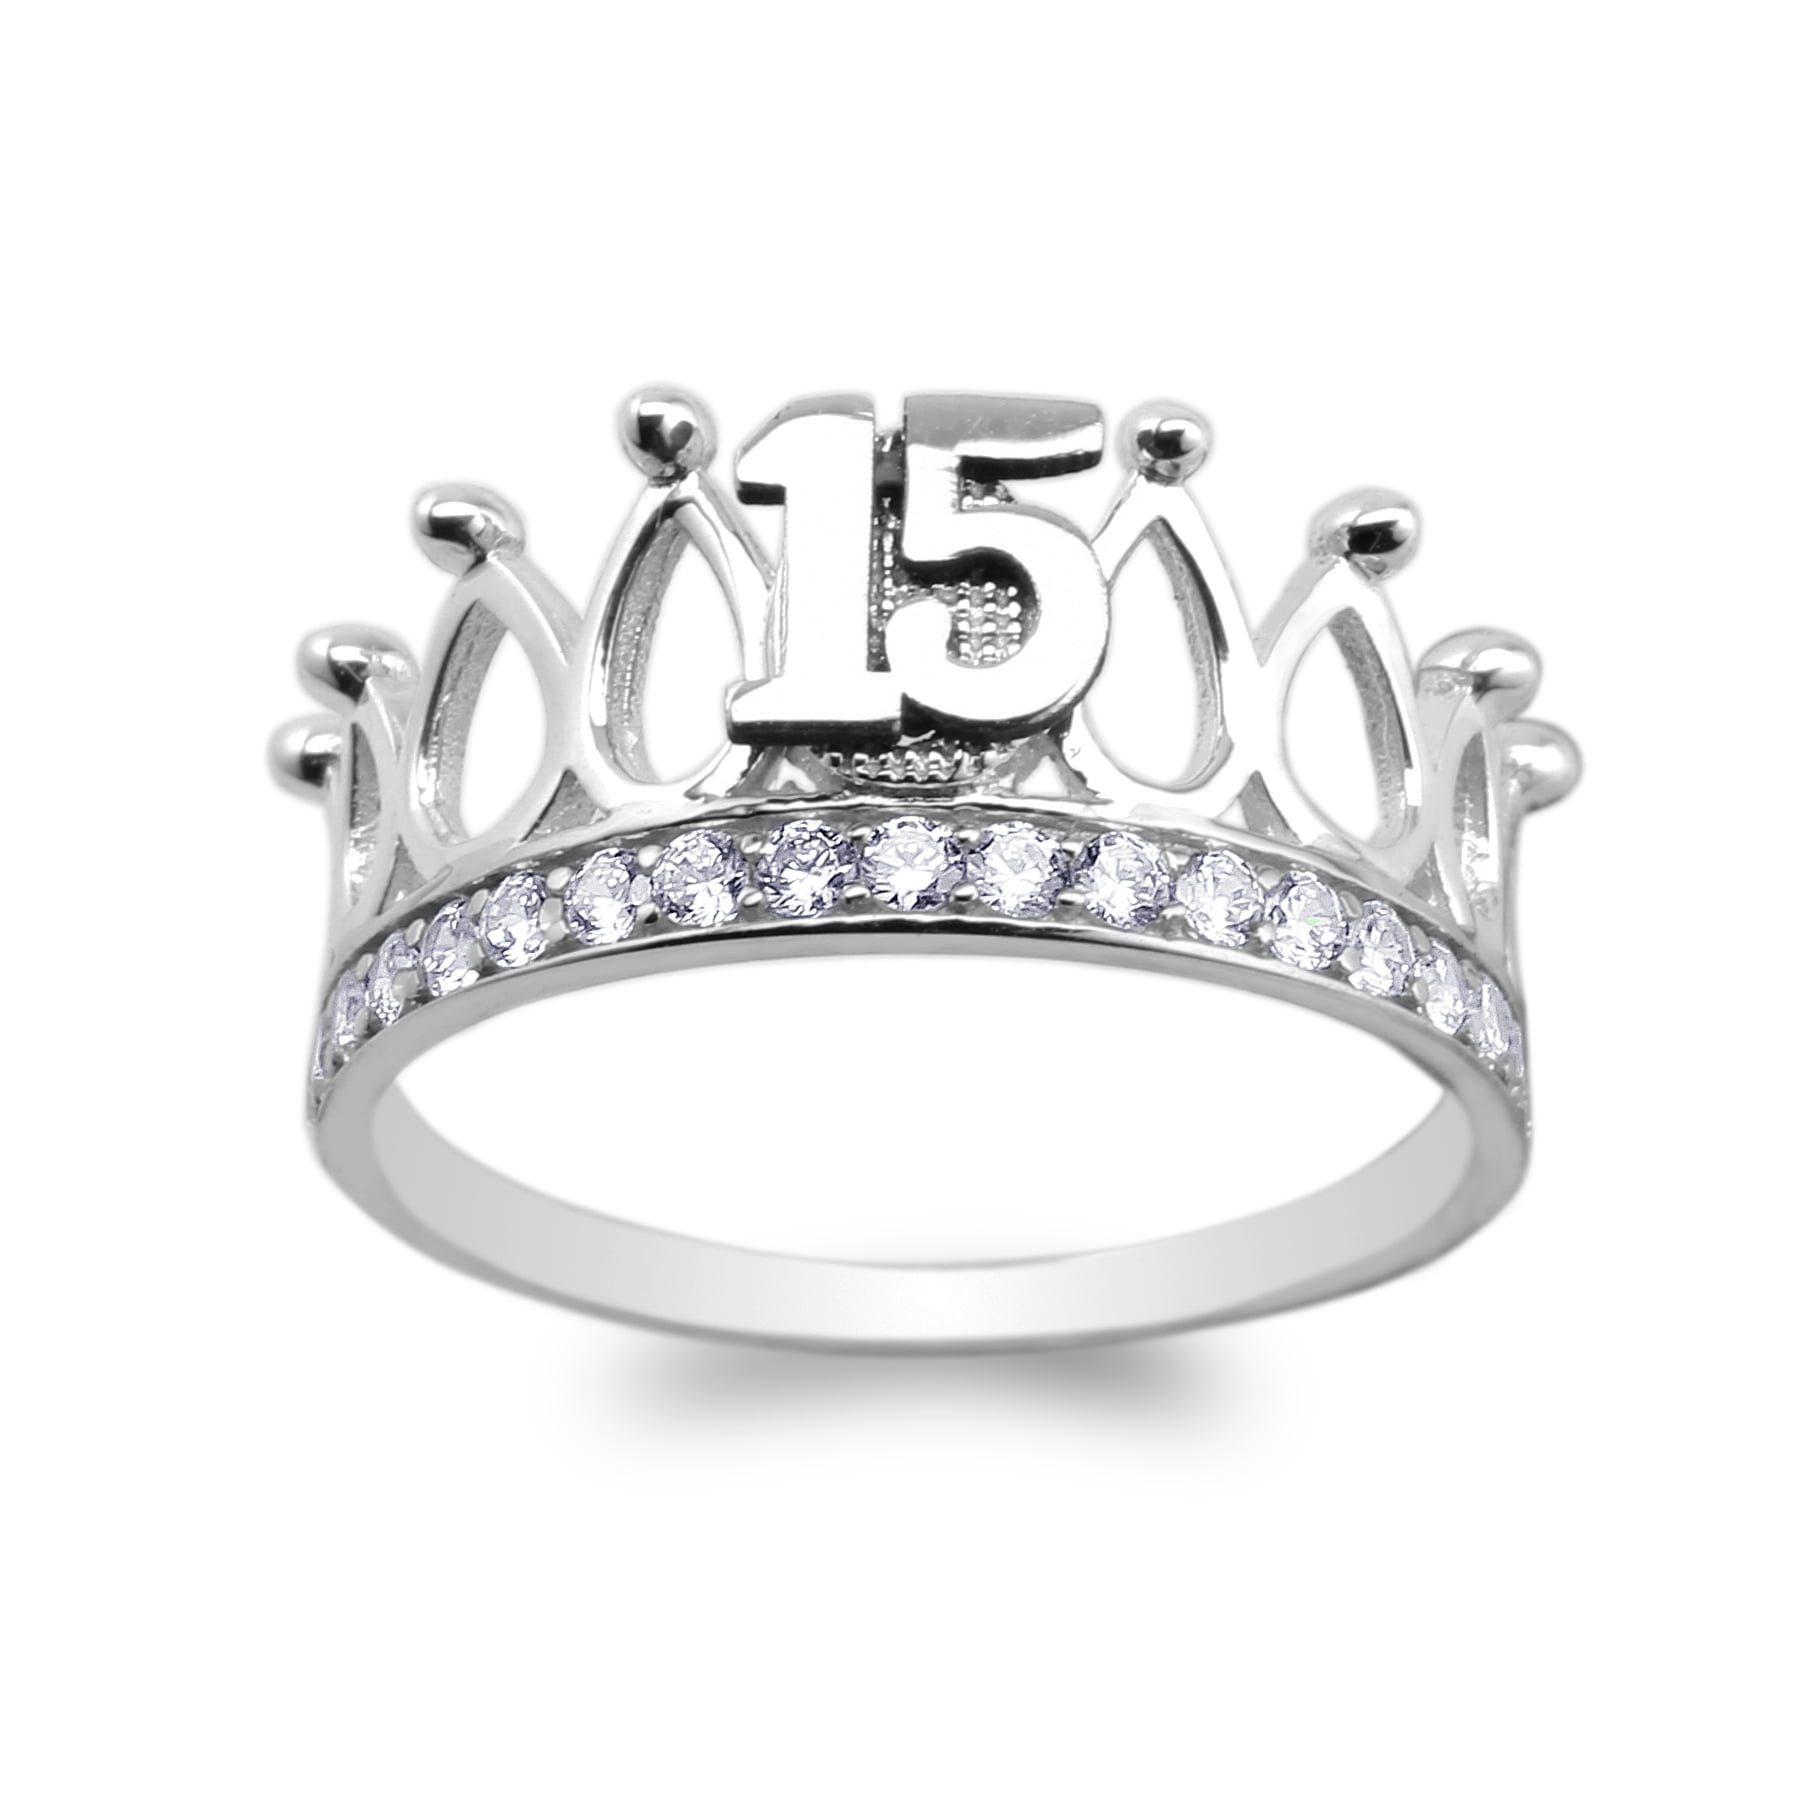 Details about   JamesJenny 925 Sterling Silver  Round CZ  Fancy Anniversary Band Ring Size 4-10